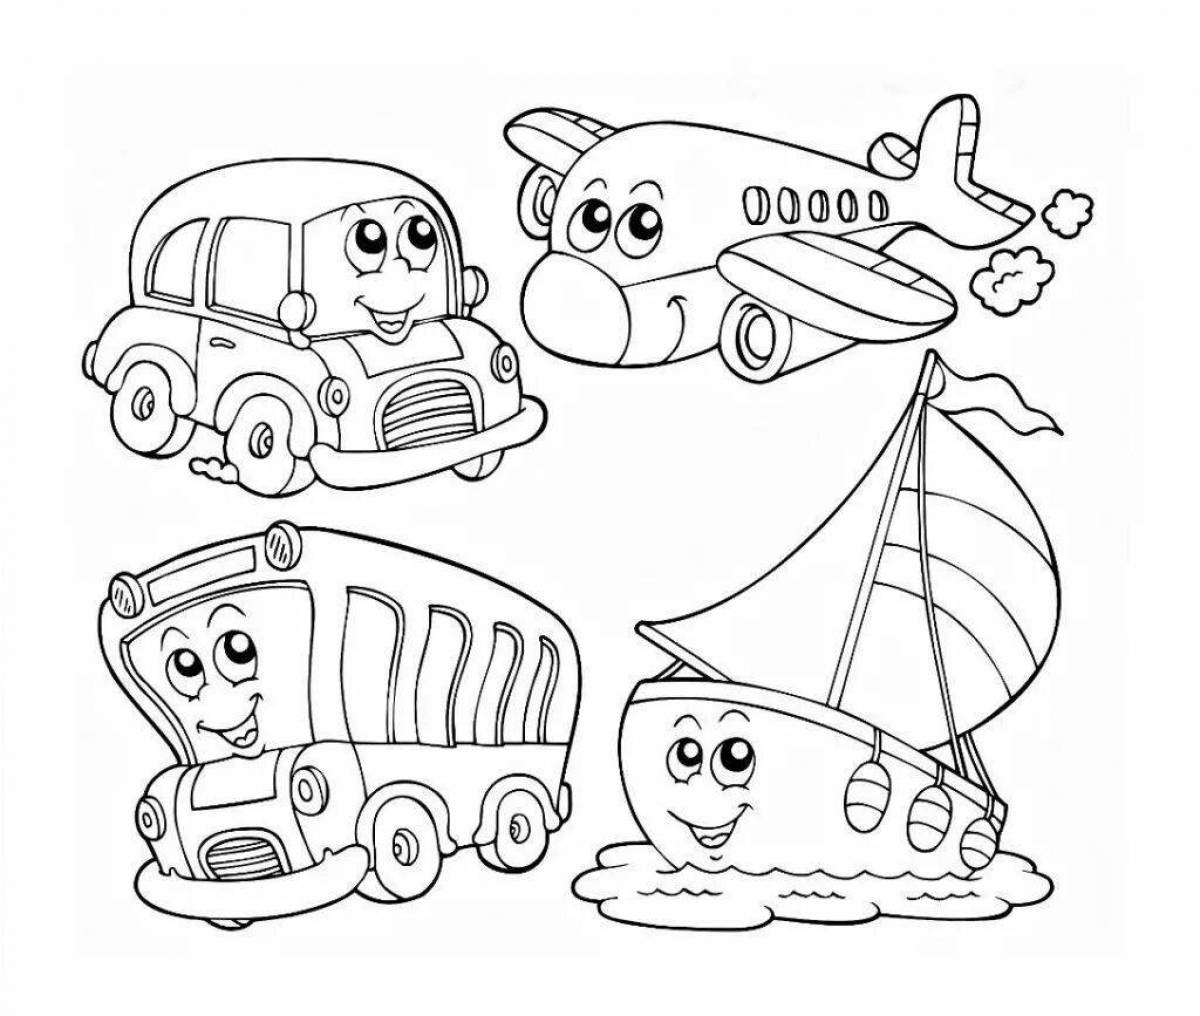 Outstanding basket coloring page